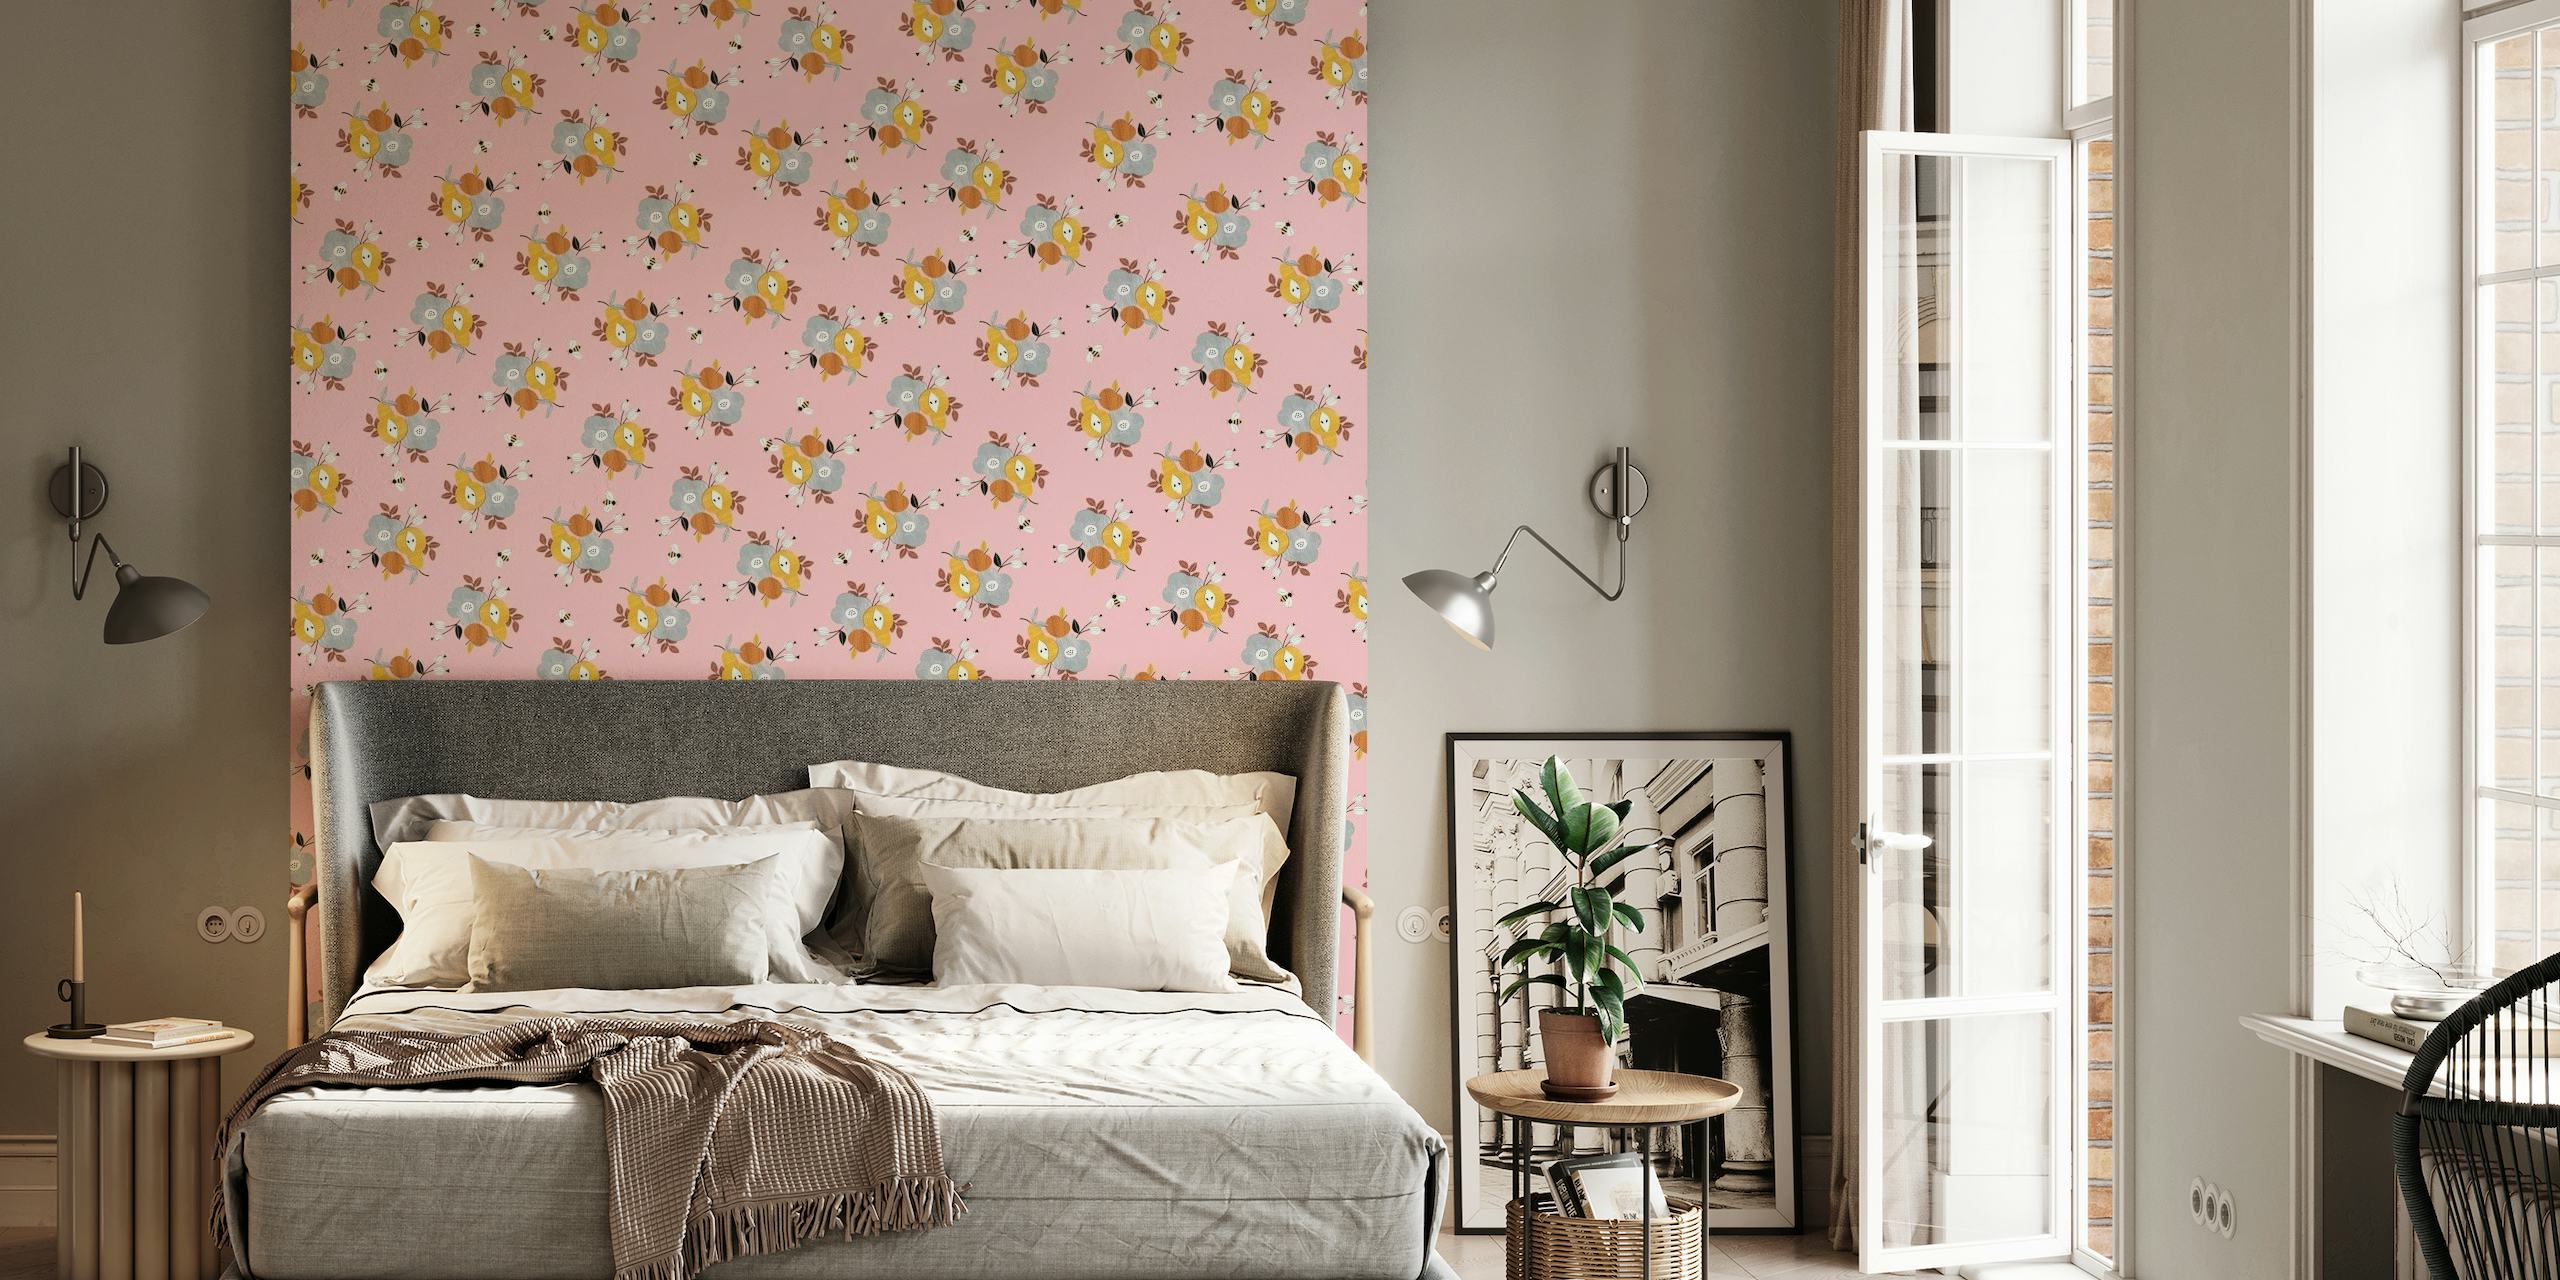 Pastel pink wall mural with a summer sun pattern for interior decor